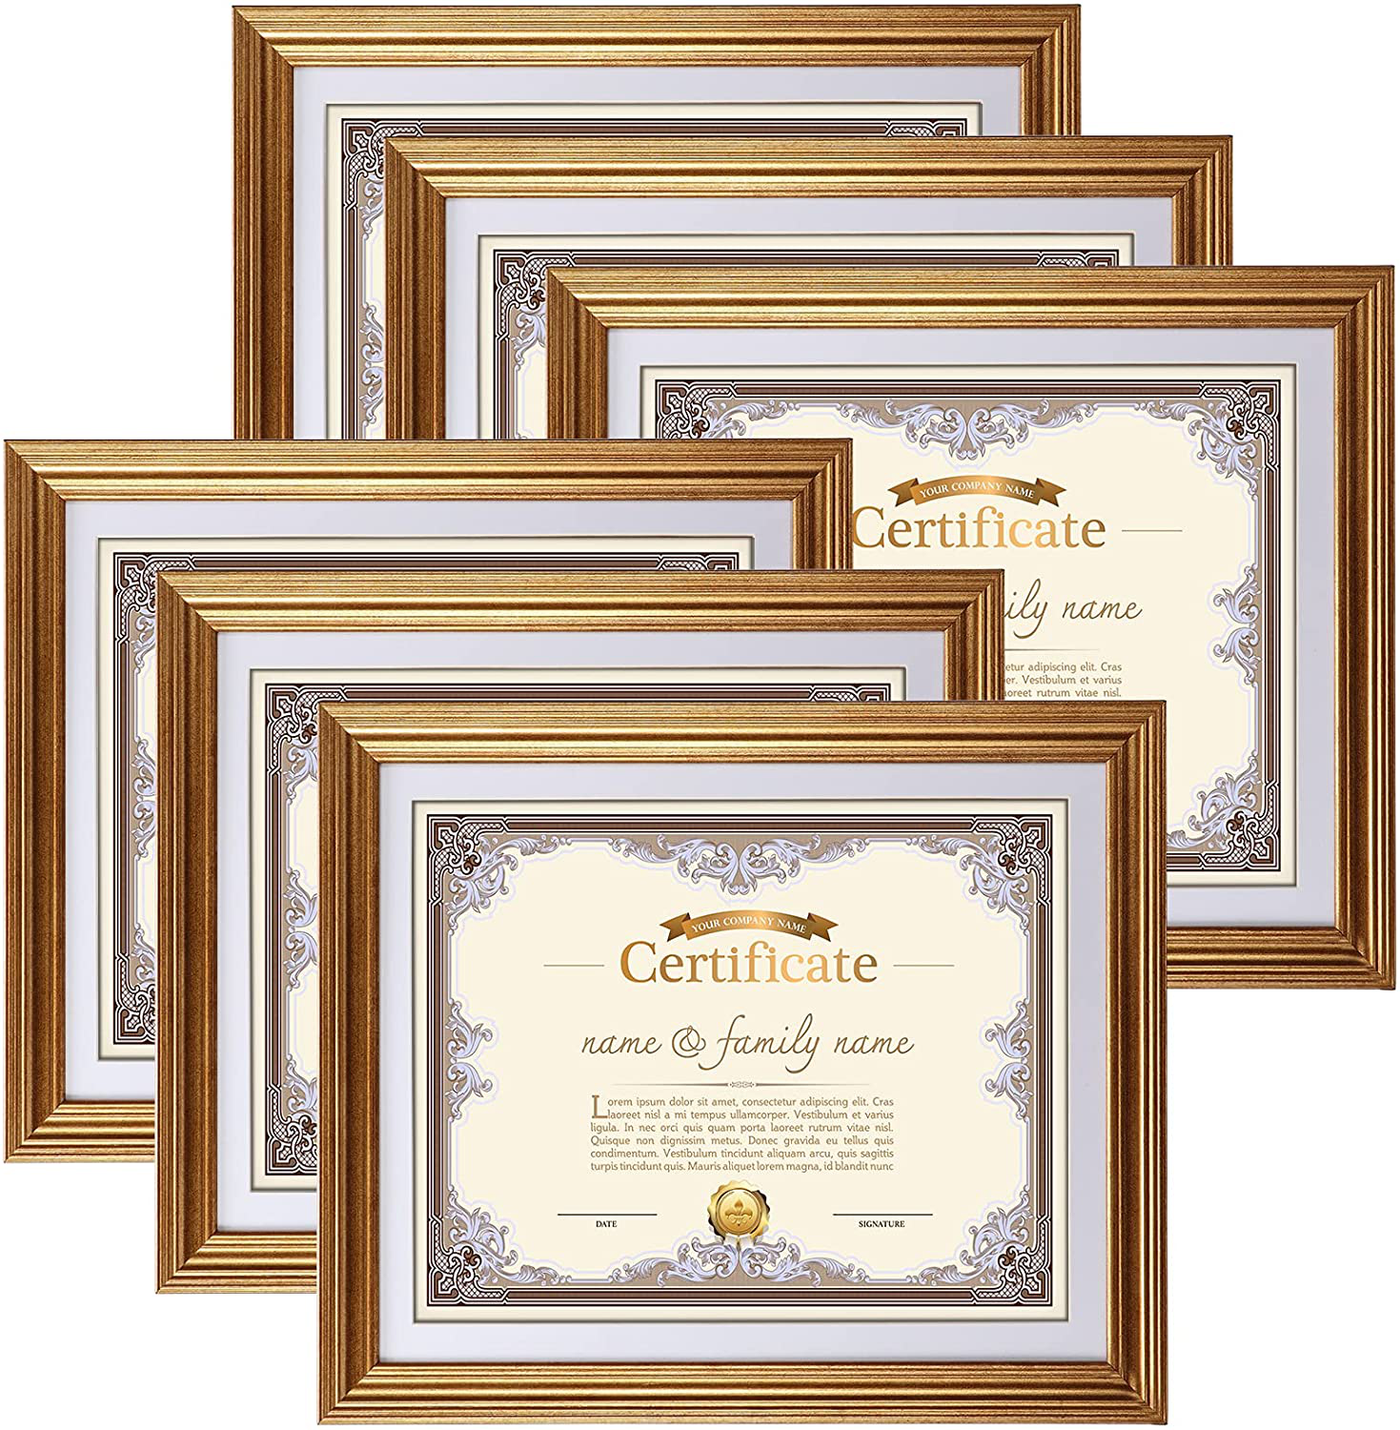 MEBRUDY 4x6 Picture Frames Set of 6, Display Pictures 4x6 with Mat or 5x7 Without Mat, Gold Photo Frames for Wall Mount or Table Top